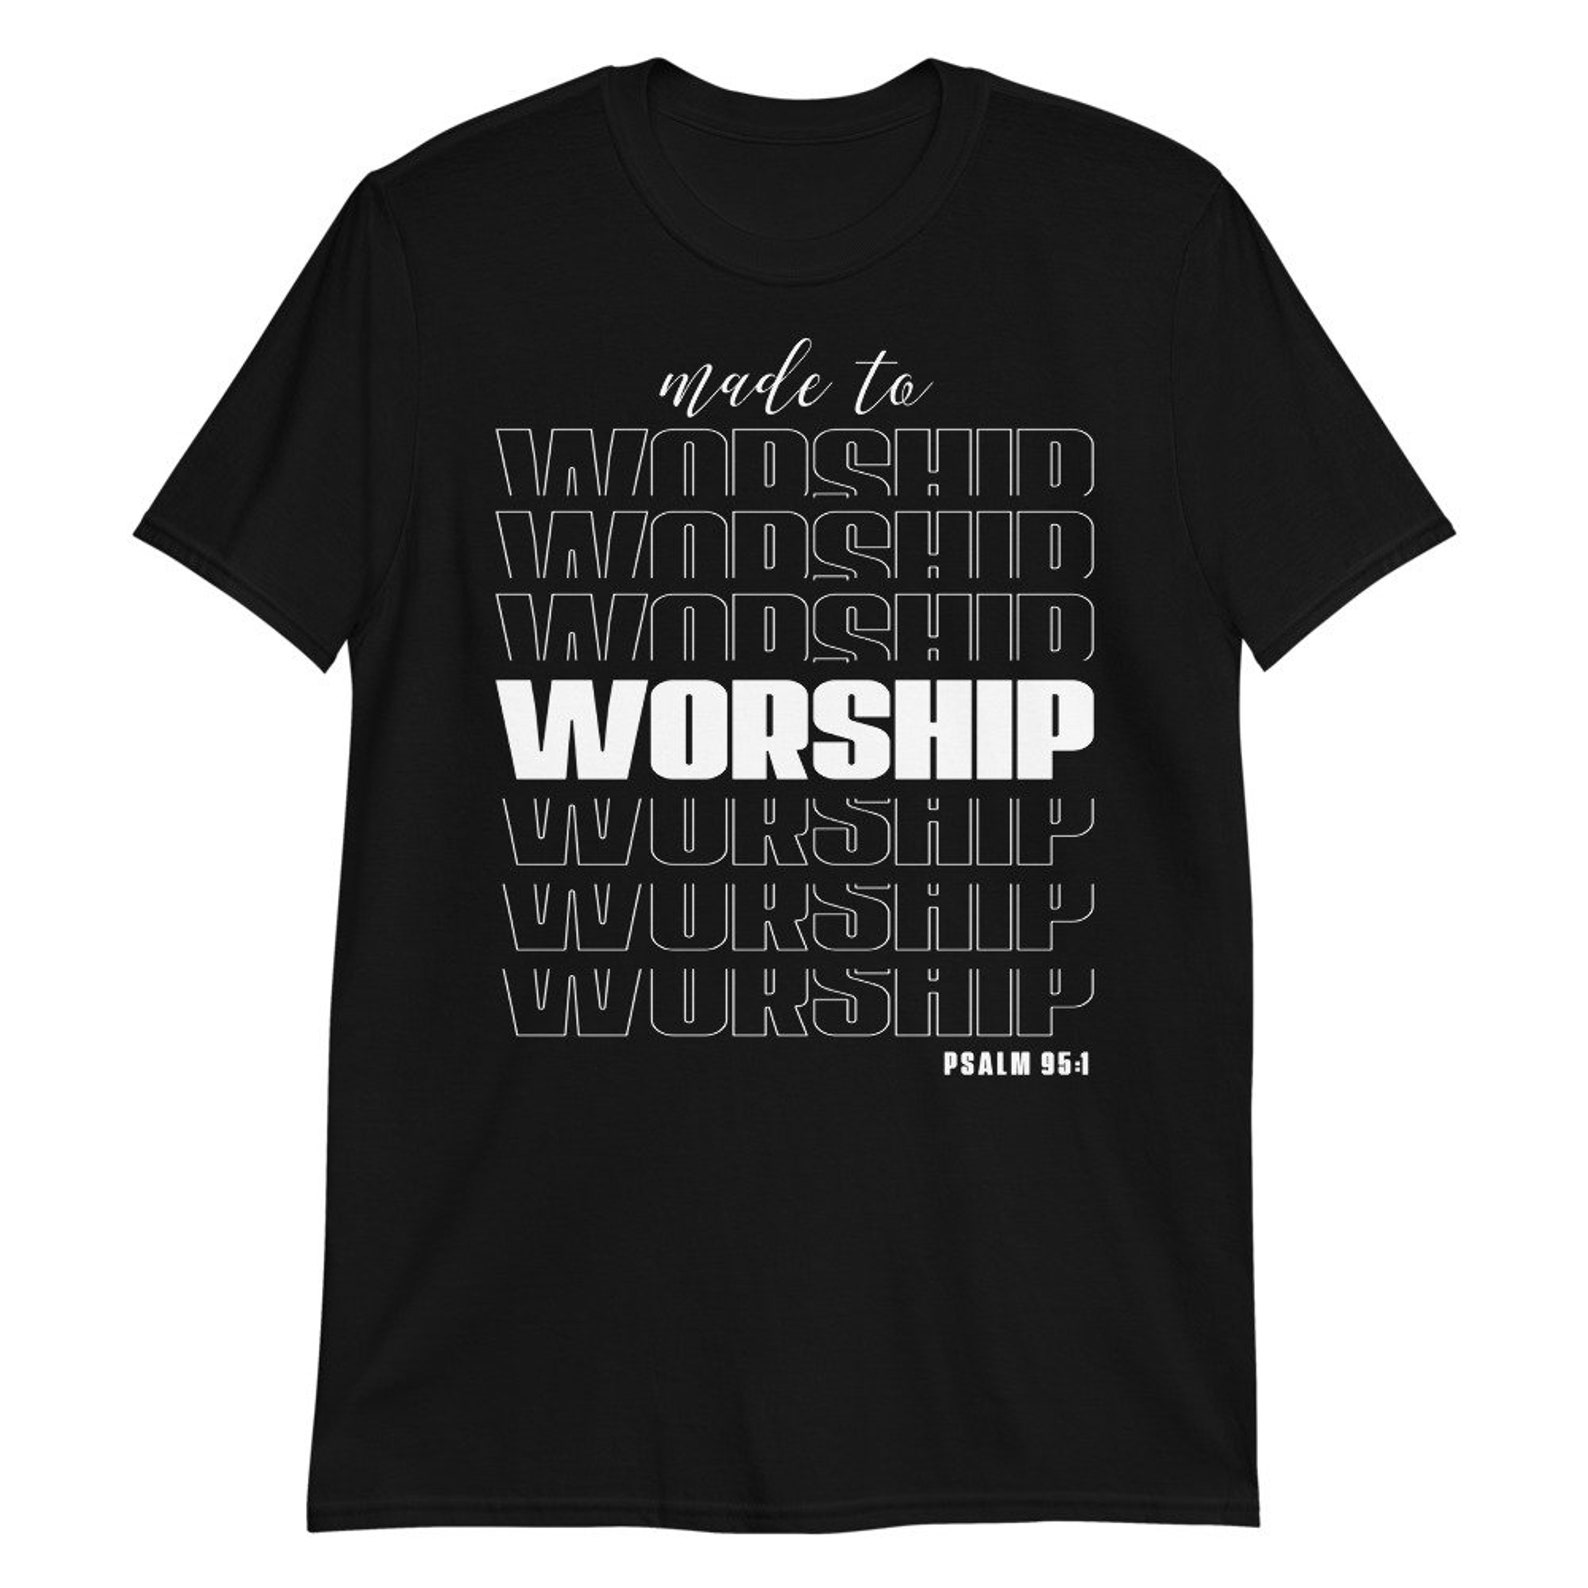 Made to Worship Cotton T-Shirt Unisex Christian Apparel | Etsy